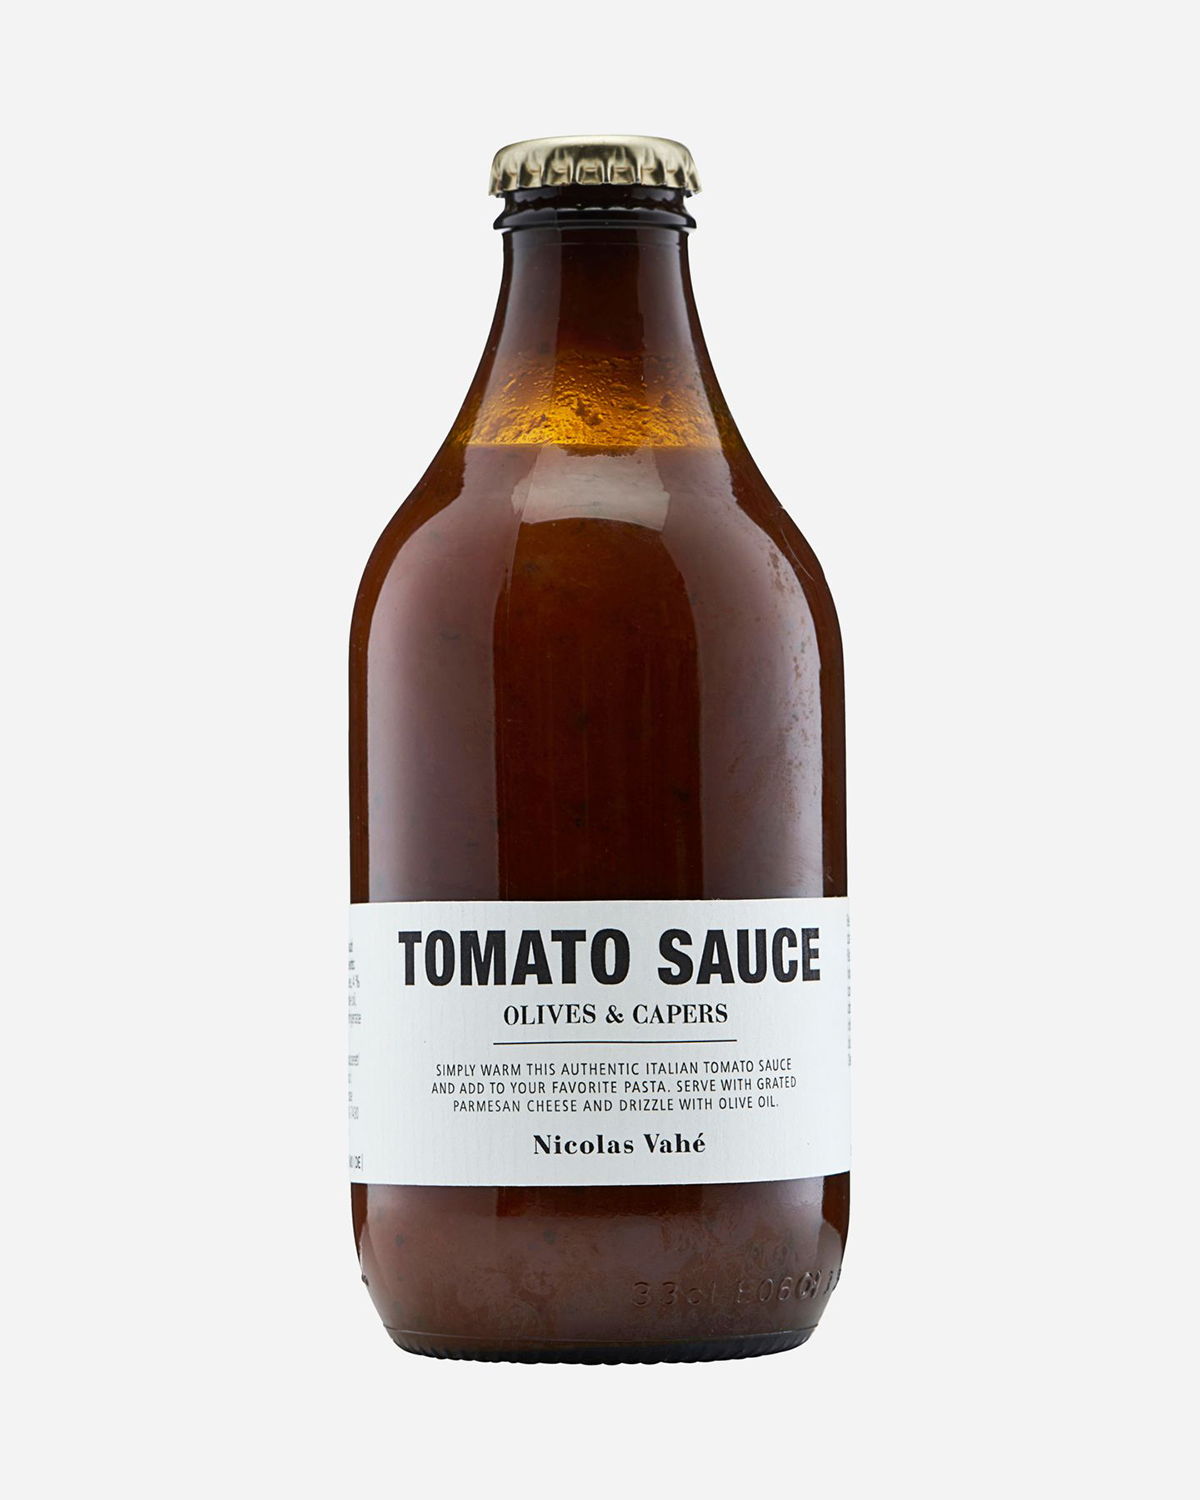 Tomato Sauce - Olives & Capers, 330 ml